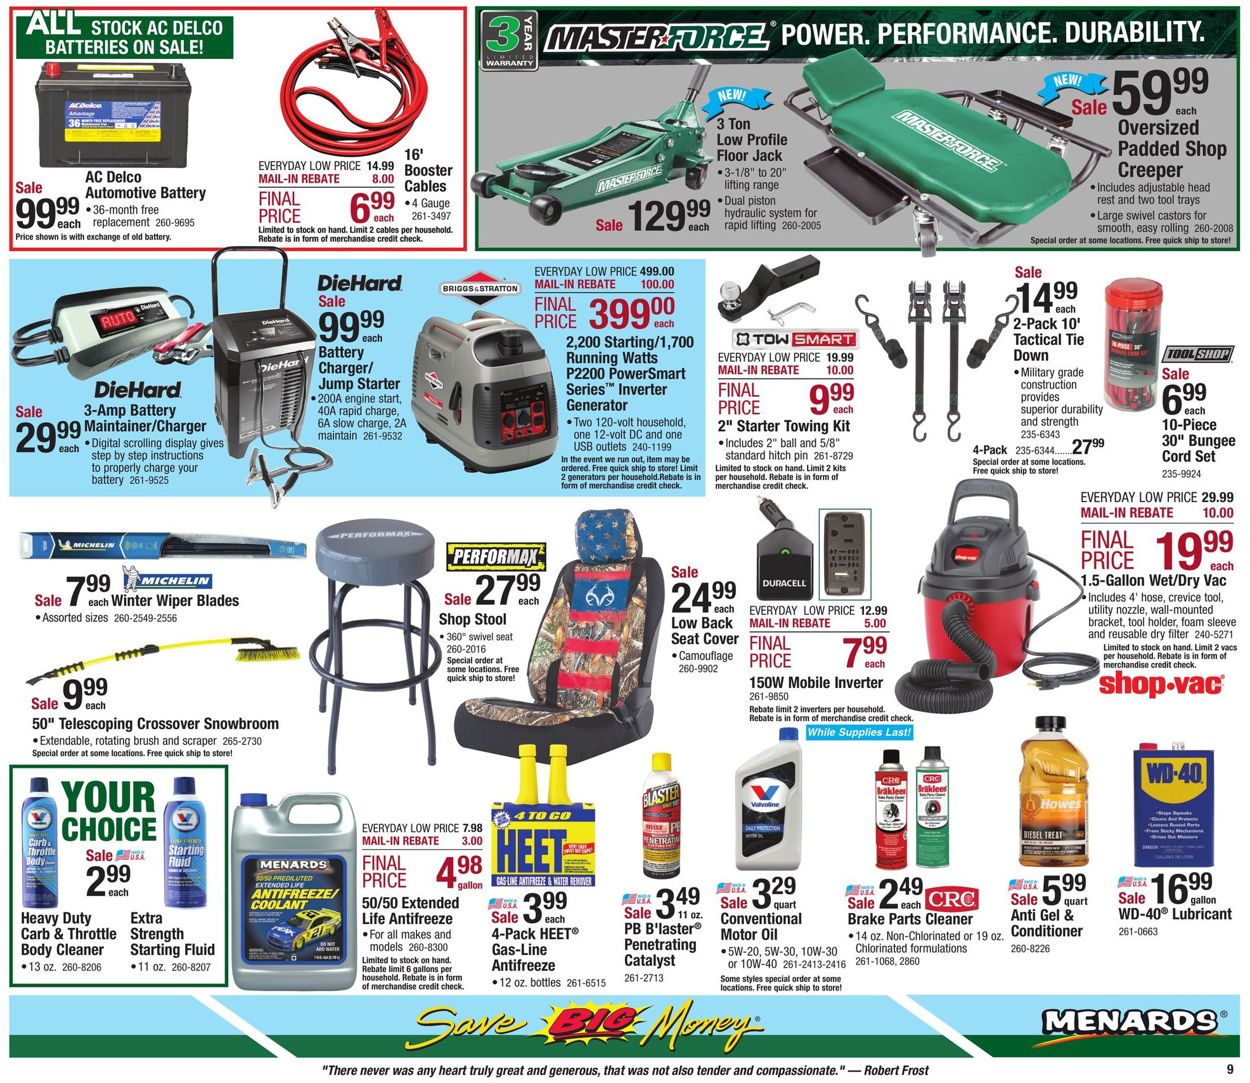 Menards - Christmas Sale Ad 2019 Current weekly ad 12/15 - 12/24/2019 [11] - 0